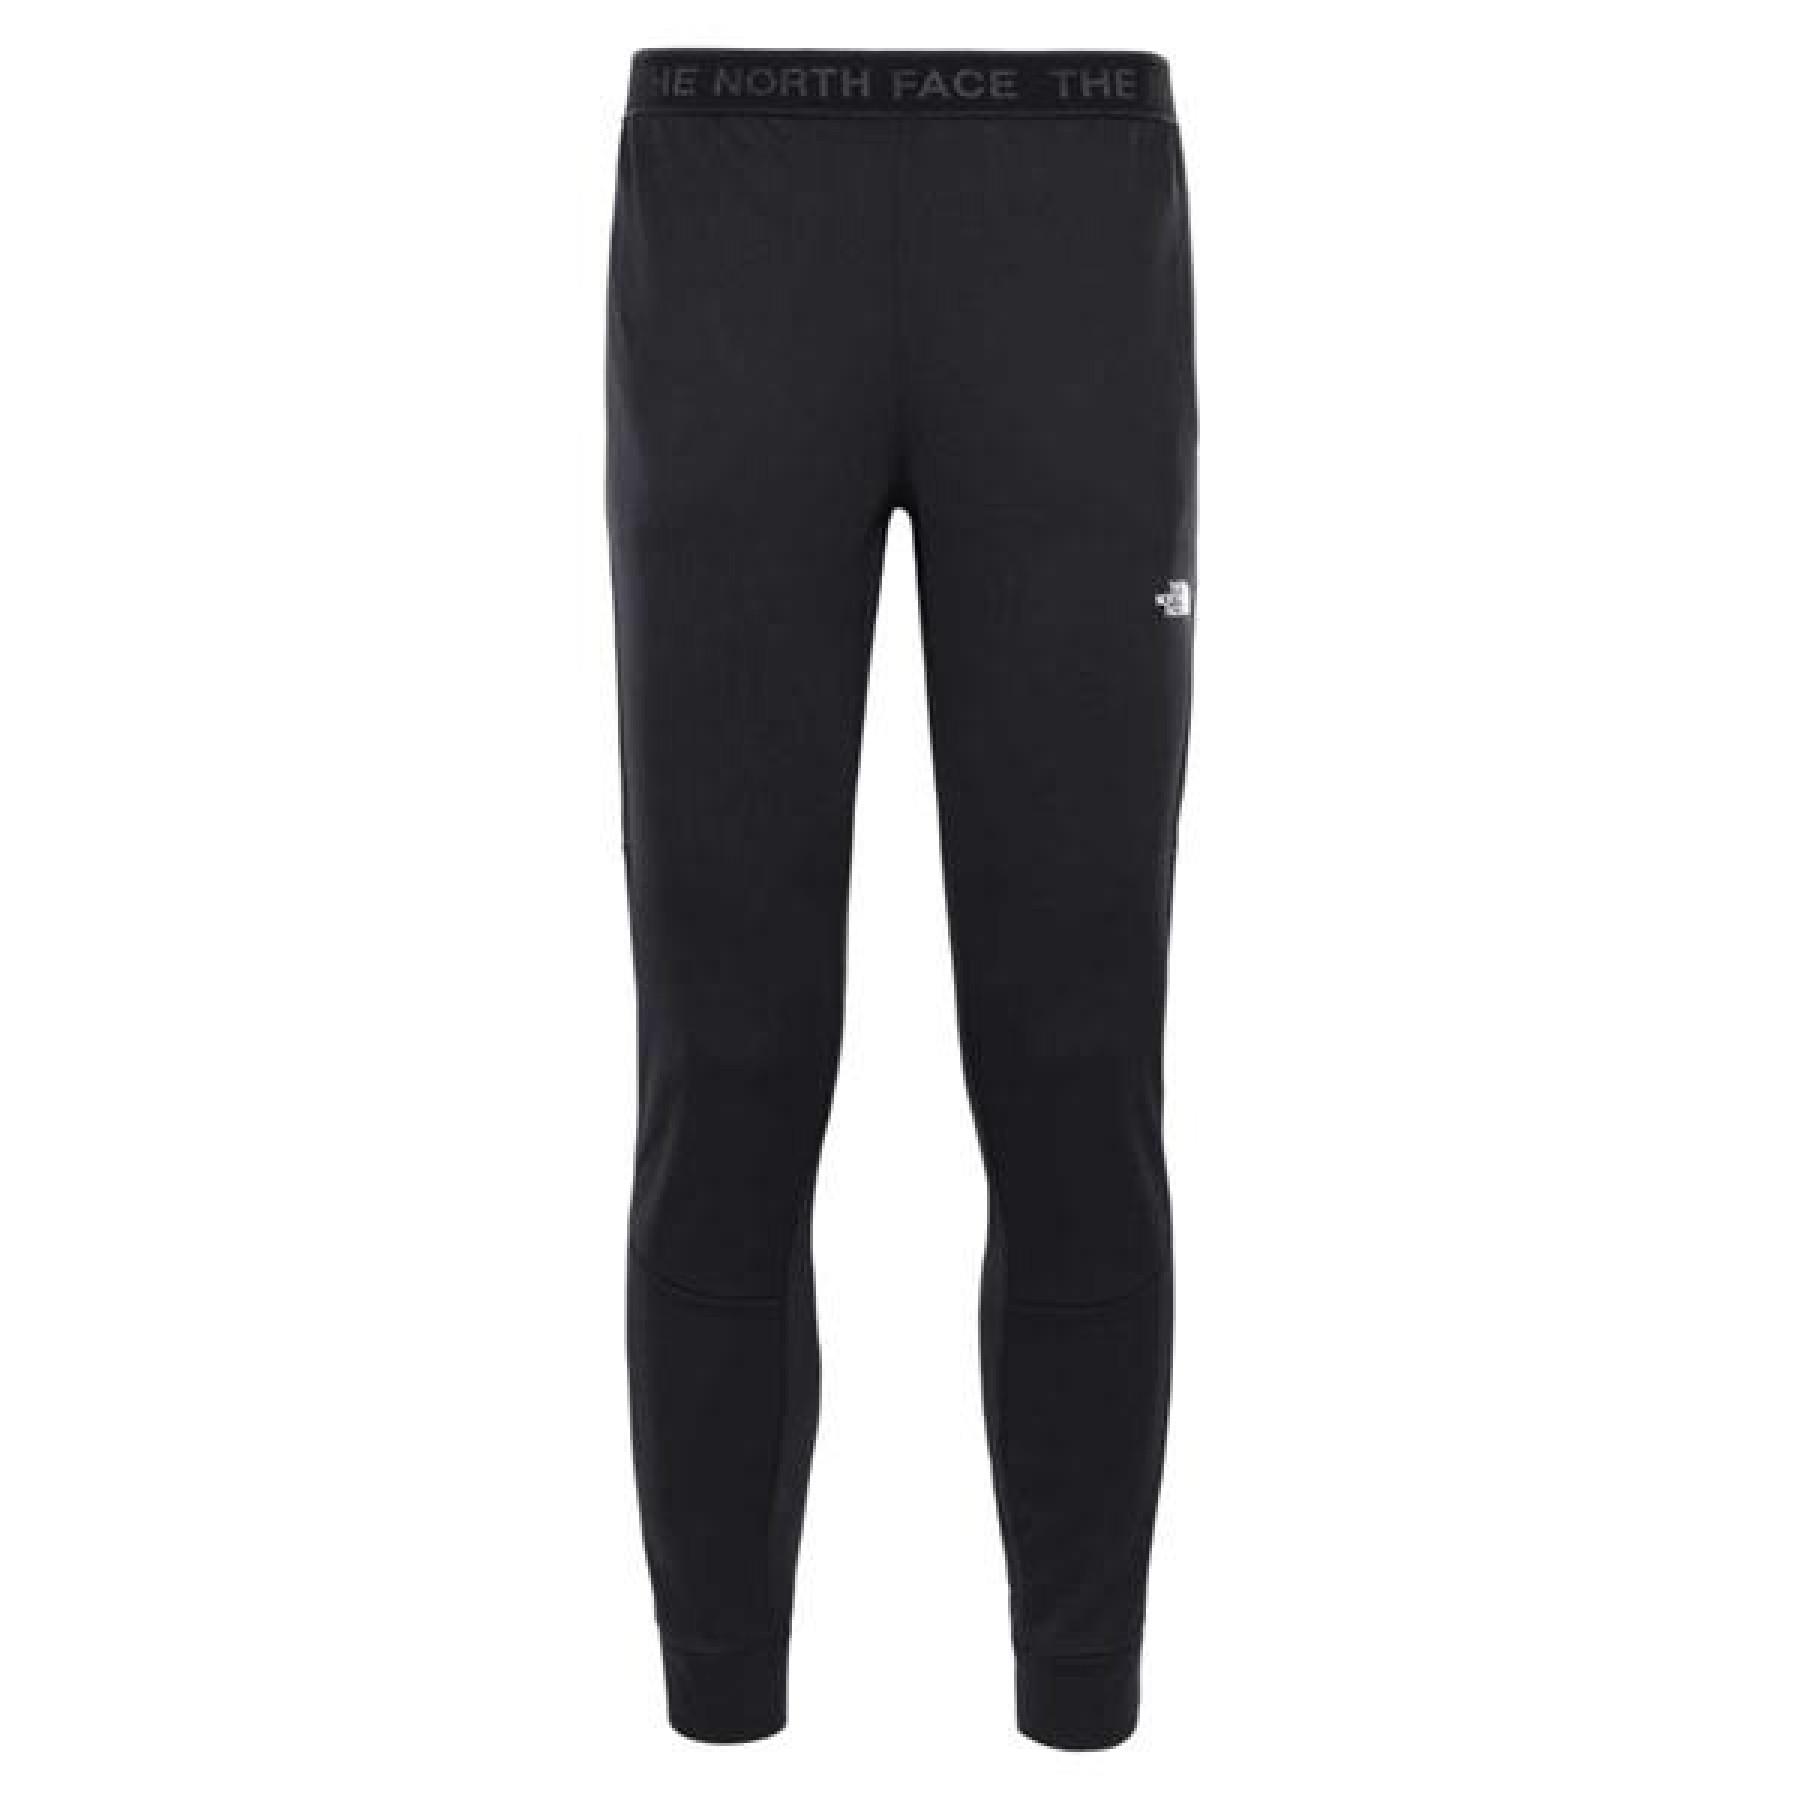 Vrouwenbroek The North Face Basic